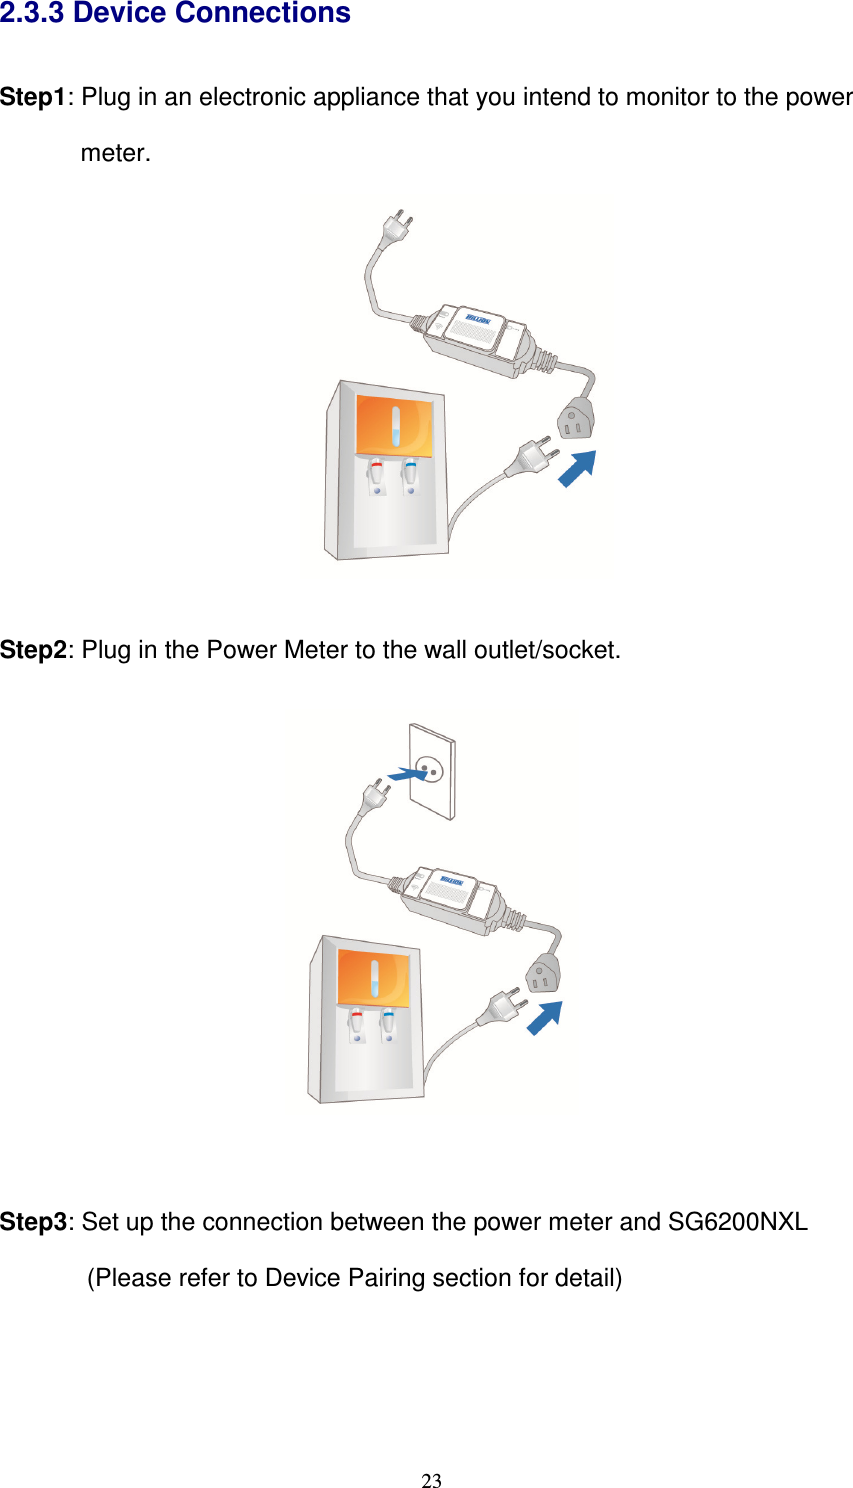   232.3.3 Device Connections  Step1: Plug in an electronic appliance that you intend to monitor to the power         meter.     Step2: Plug in the Power Meter to the wall outlet/socket.     Step3: Set up the connection between the power meter and SG6200NXL               (Please refer to Device Pairing section for detail) 